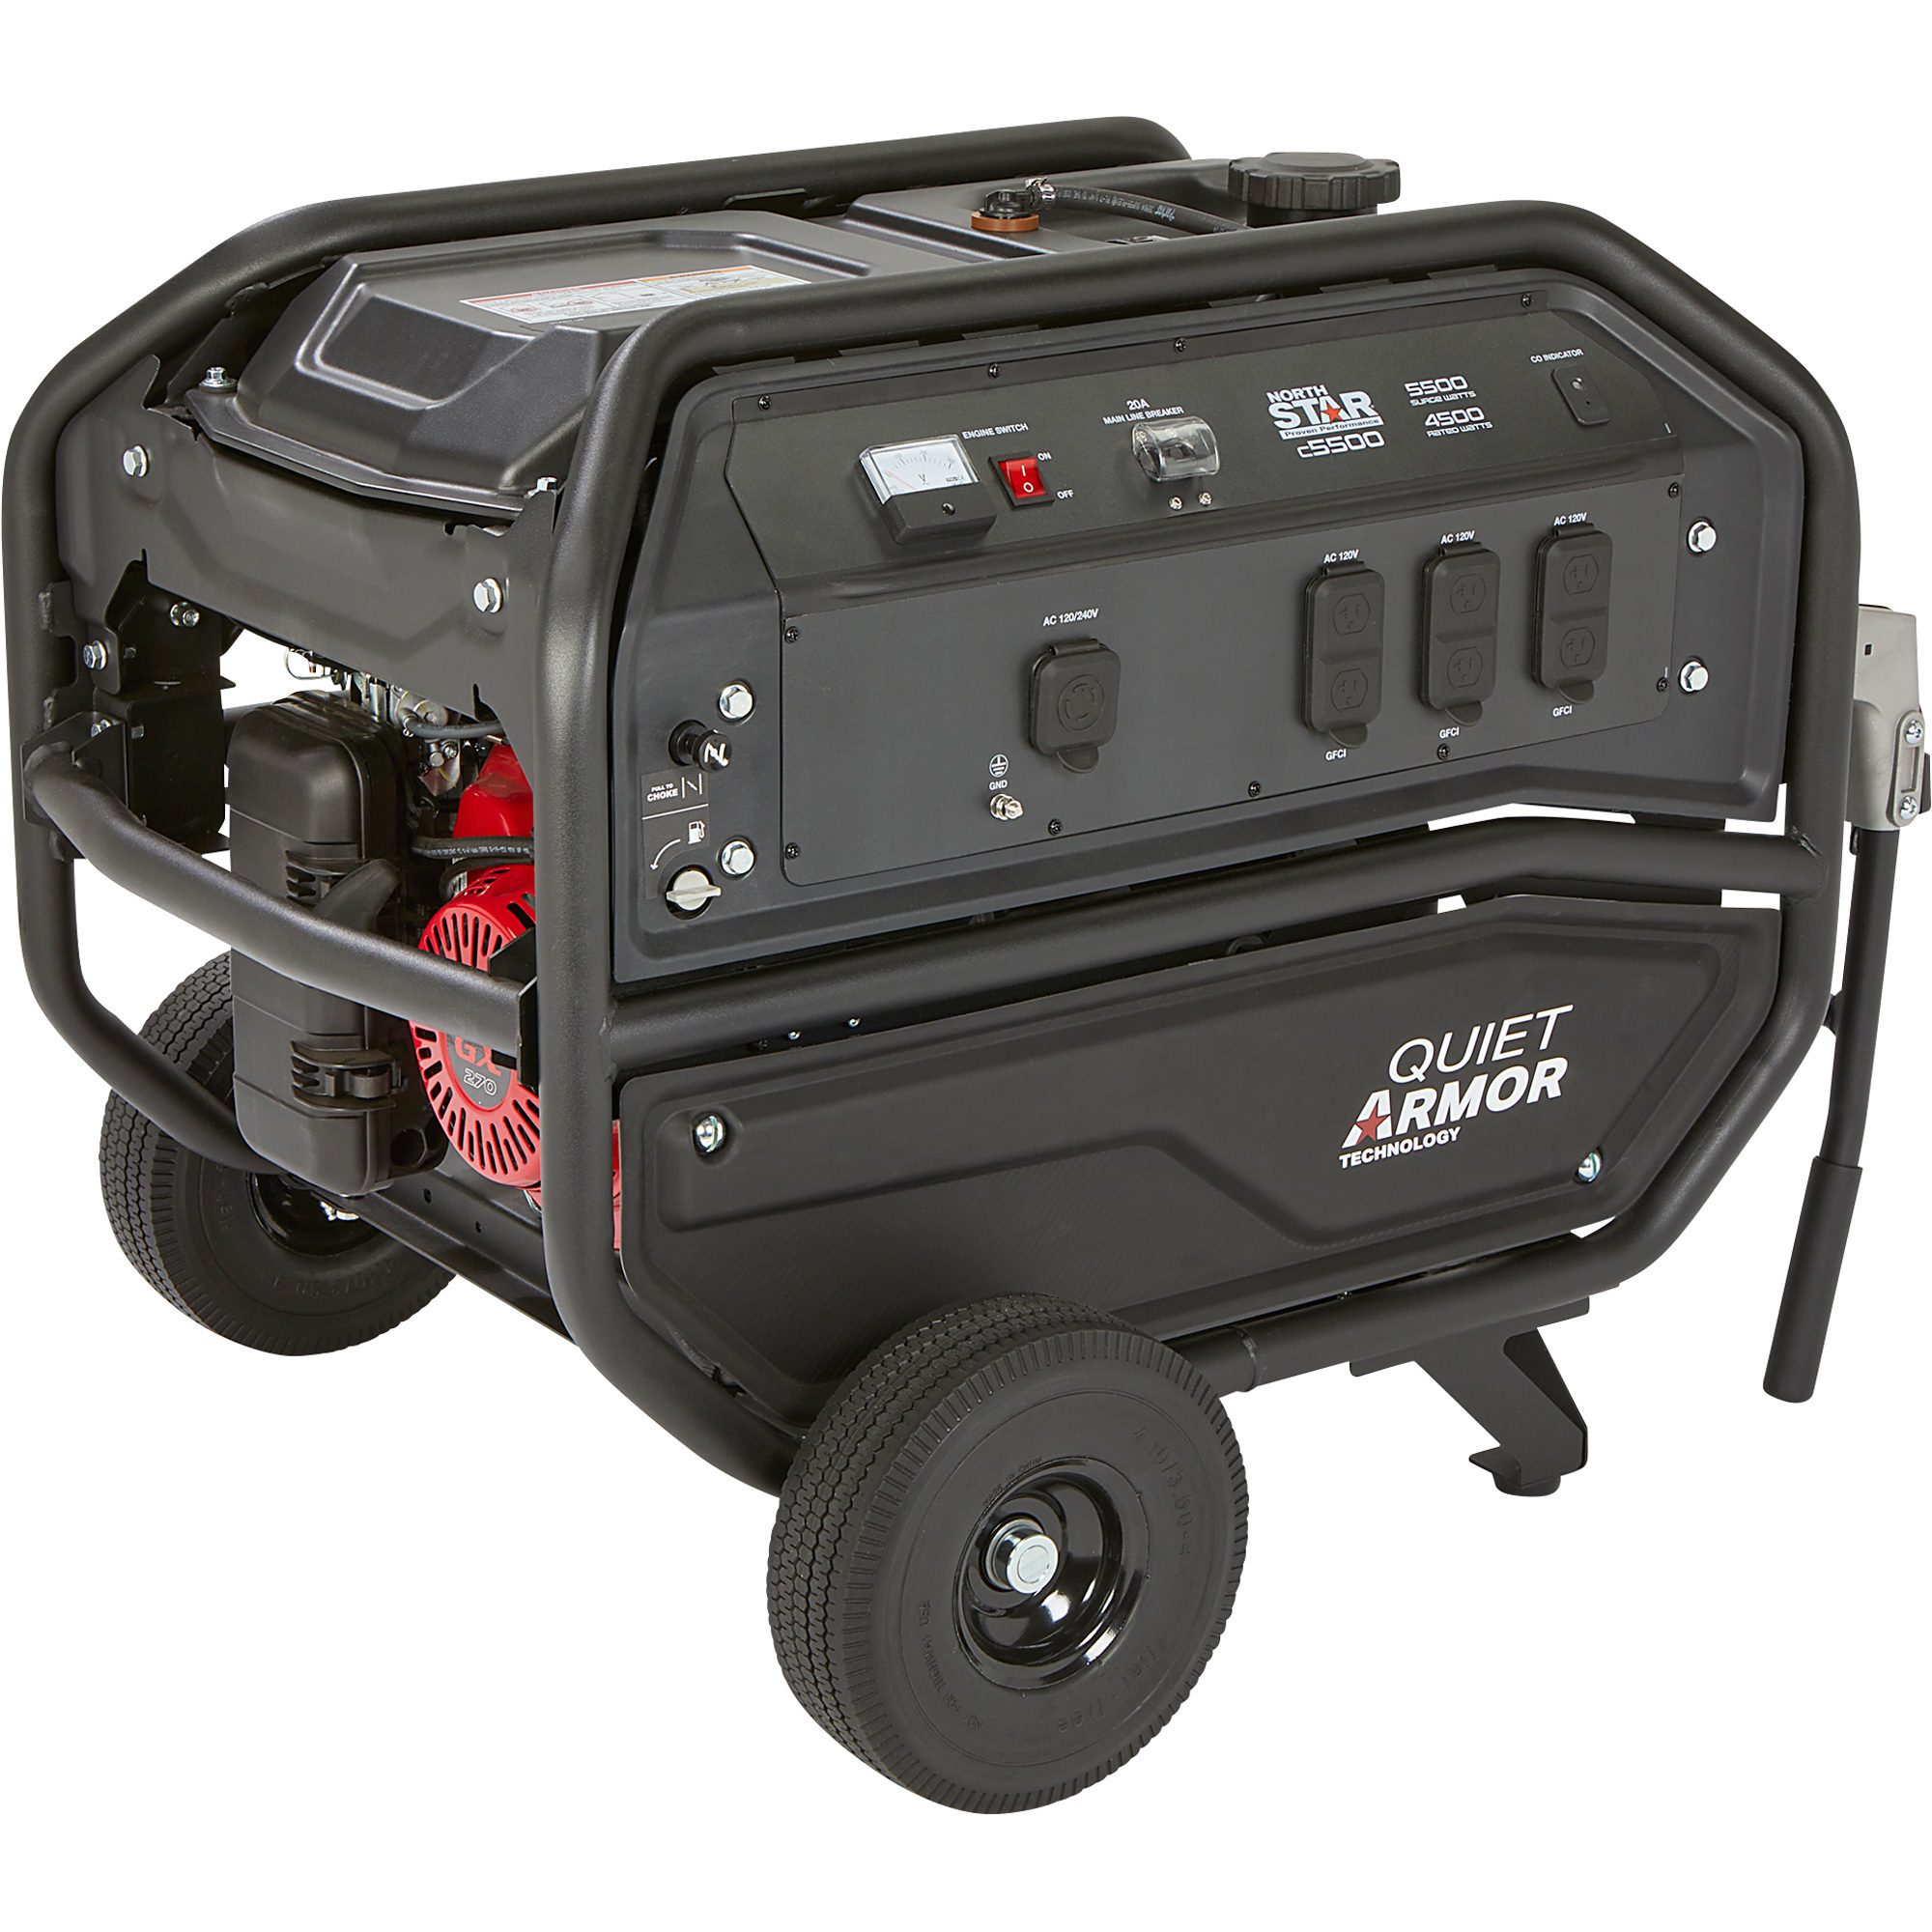 NorthStar c5500 Commercial-Grade Portable Generator, 5500 Surge Watts, 4500 Rated Watts, Model 1654400